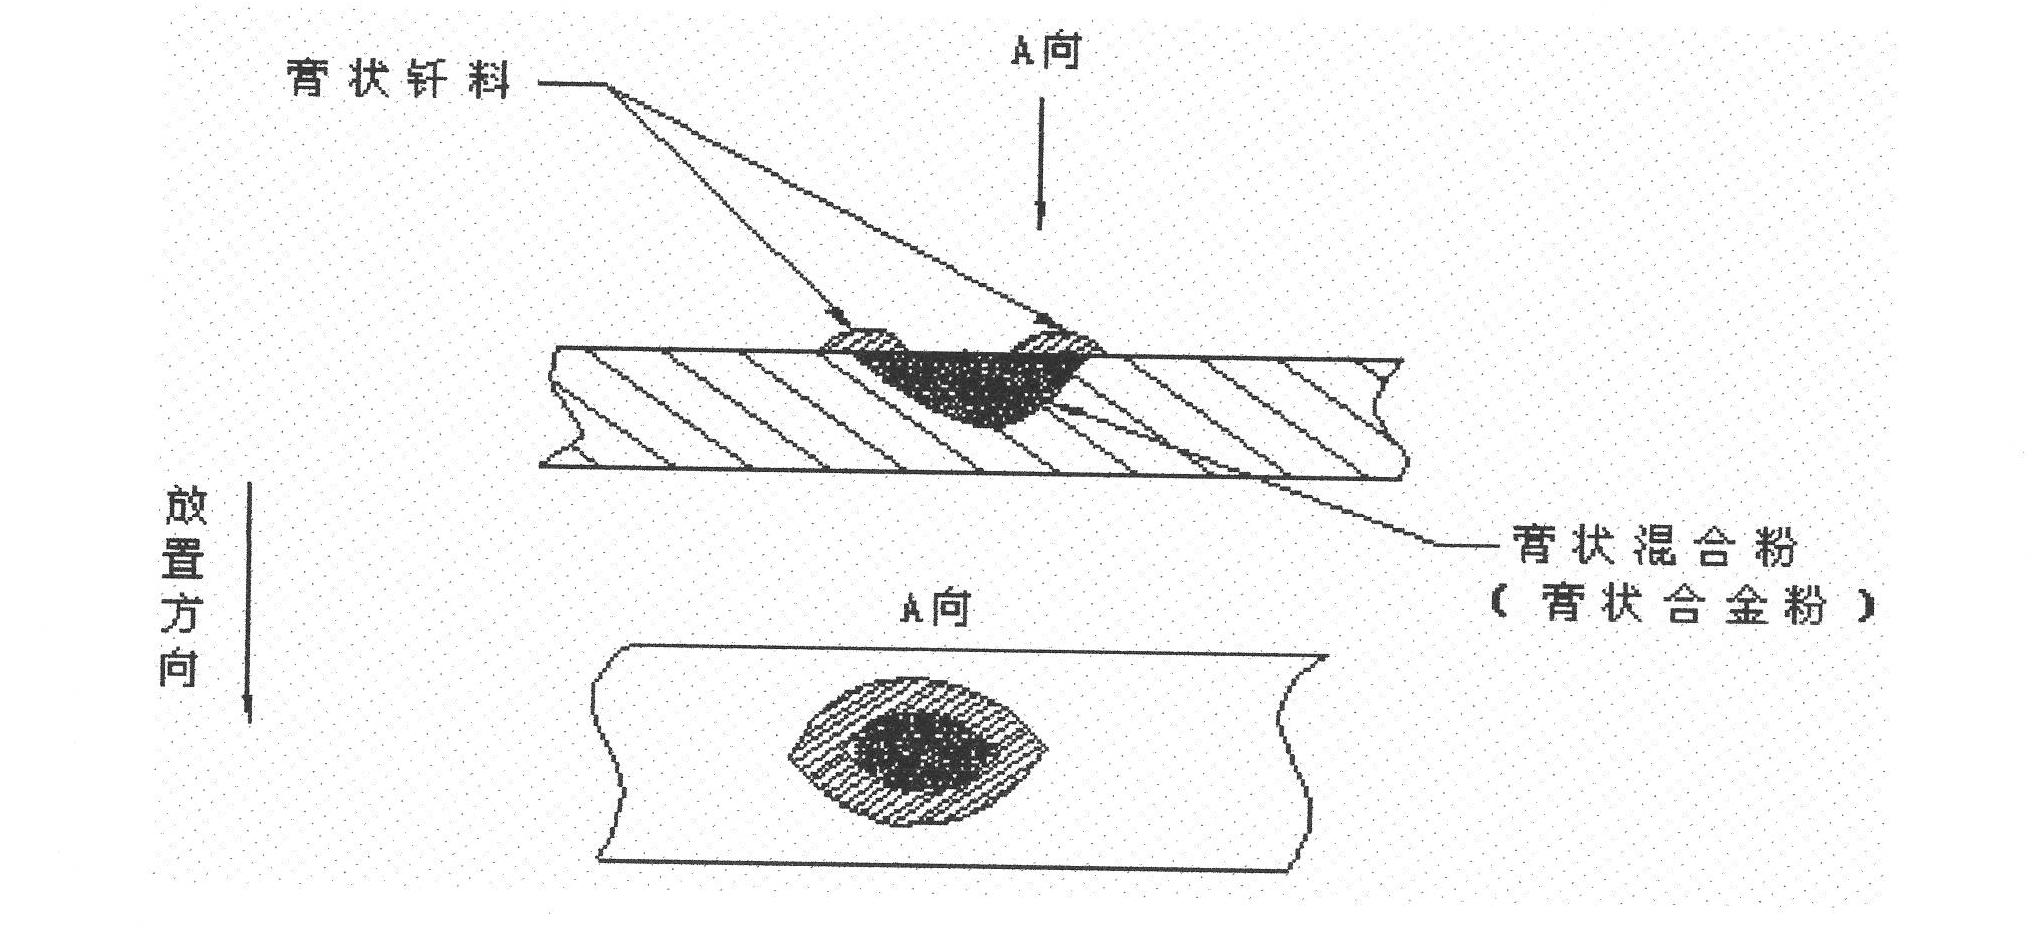 Repairing method for defects of turbine guide blade